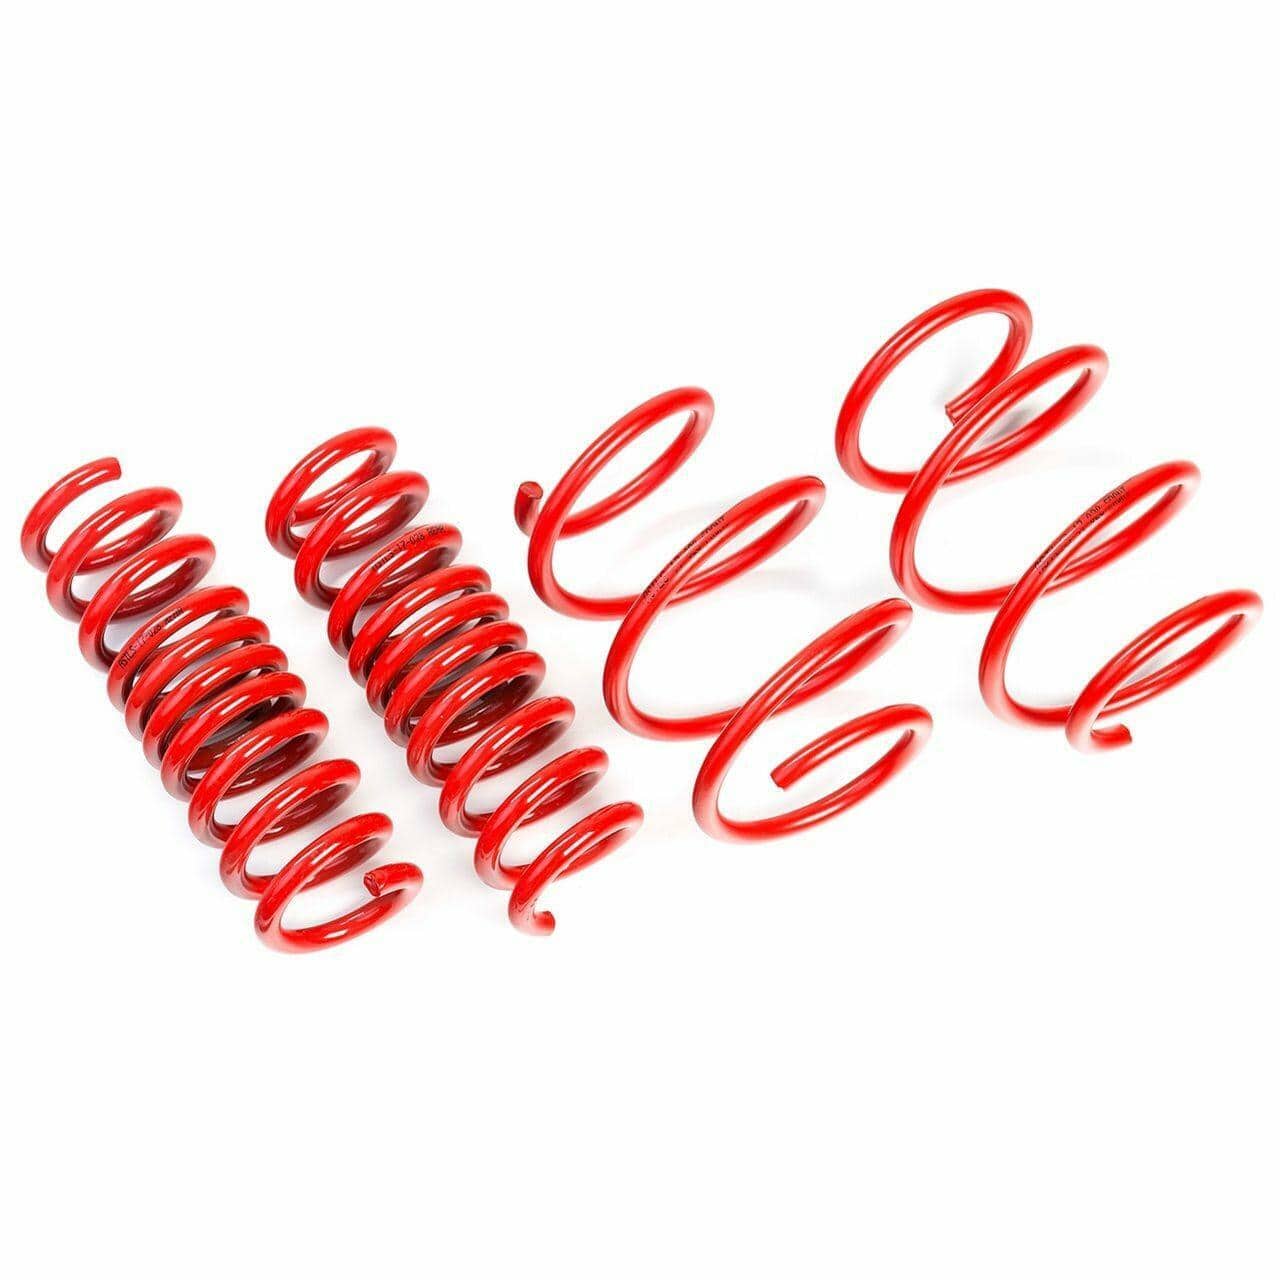 AST Suspension Lowering Springs (50MM/50MM TUV) - 1994-1998 BMW 3 Series 316i/318i Compact (E36) ASTLS-14-365